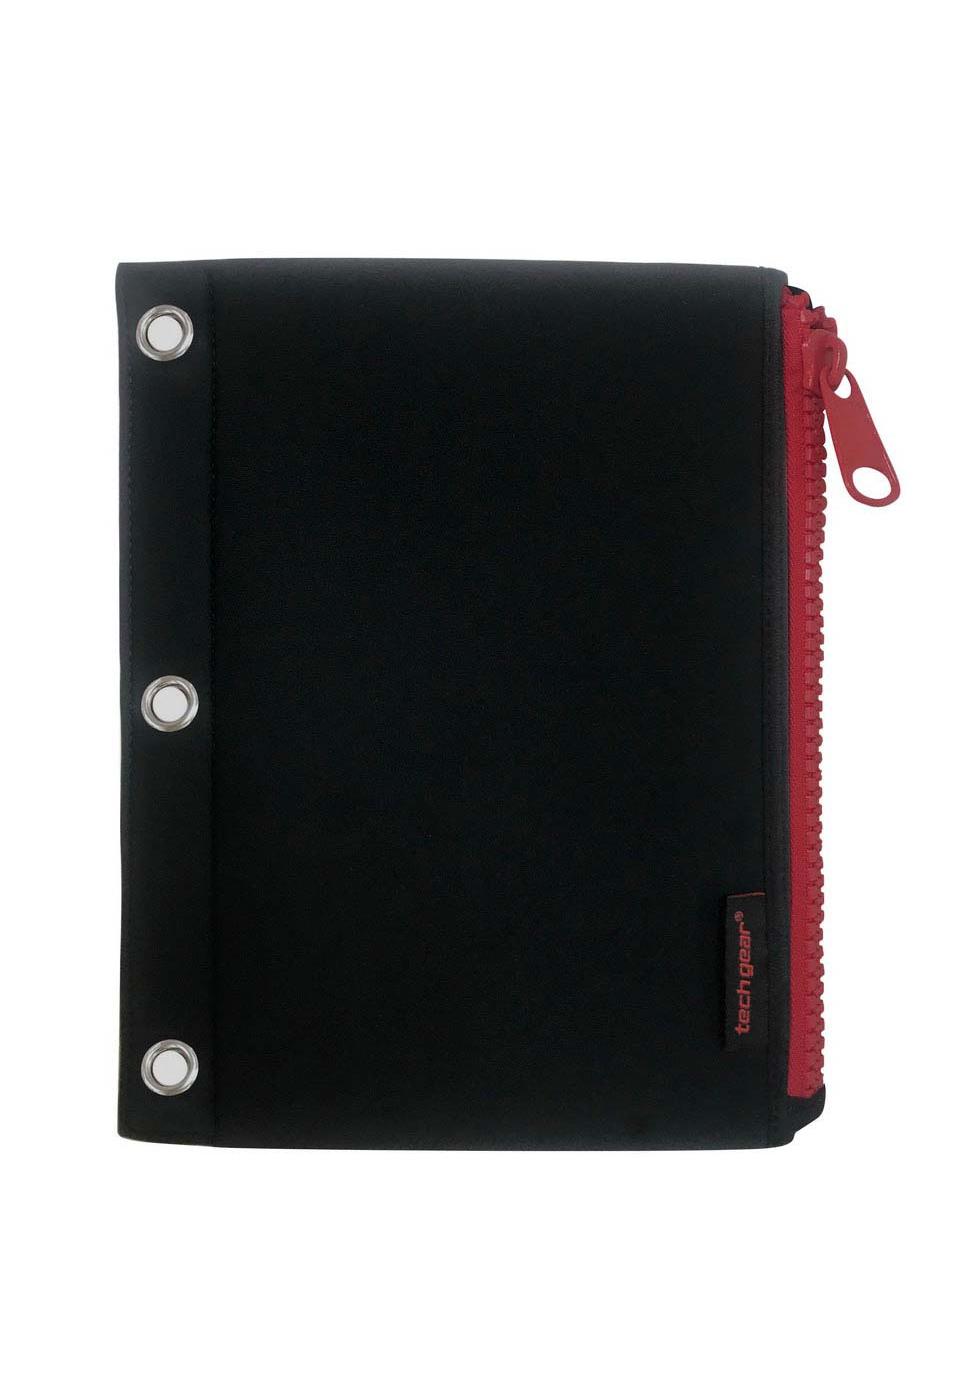 Tech Gear Neo XLZ Binder Pouch - Black & Red; image 1 of 2